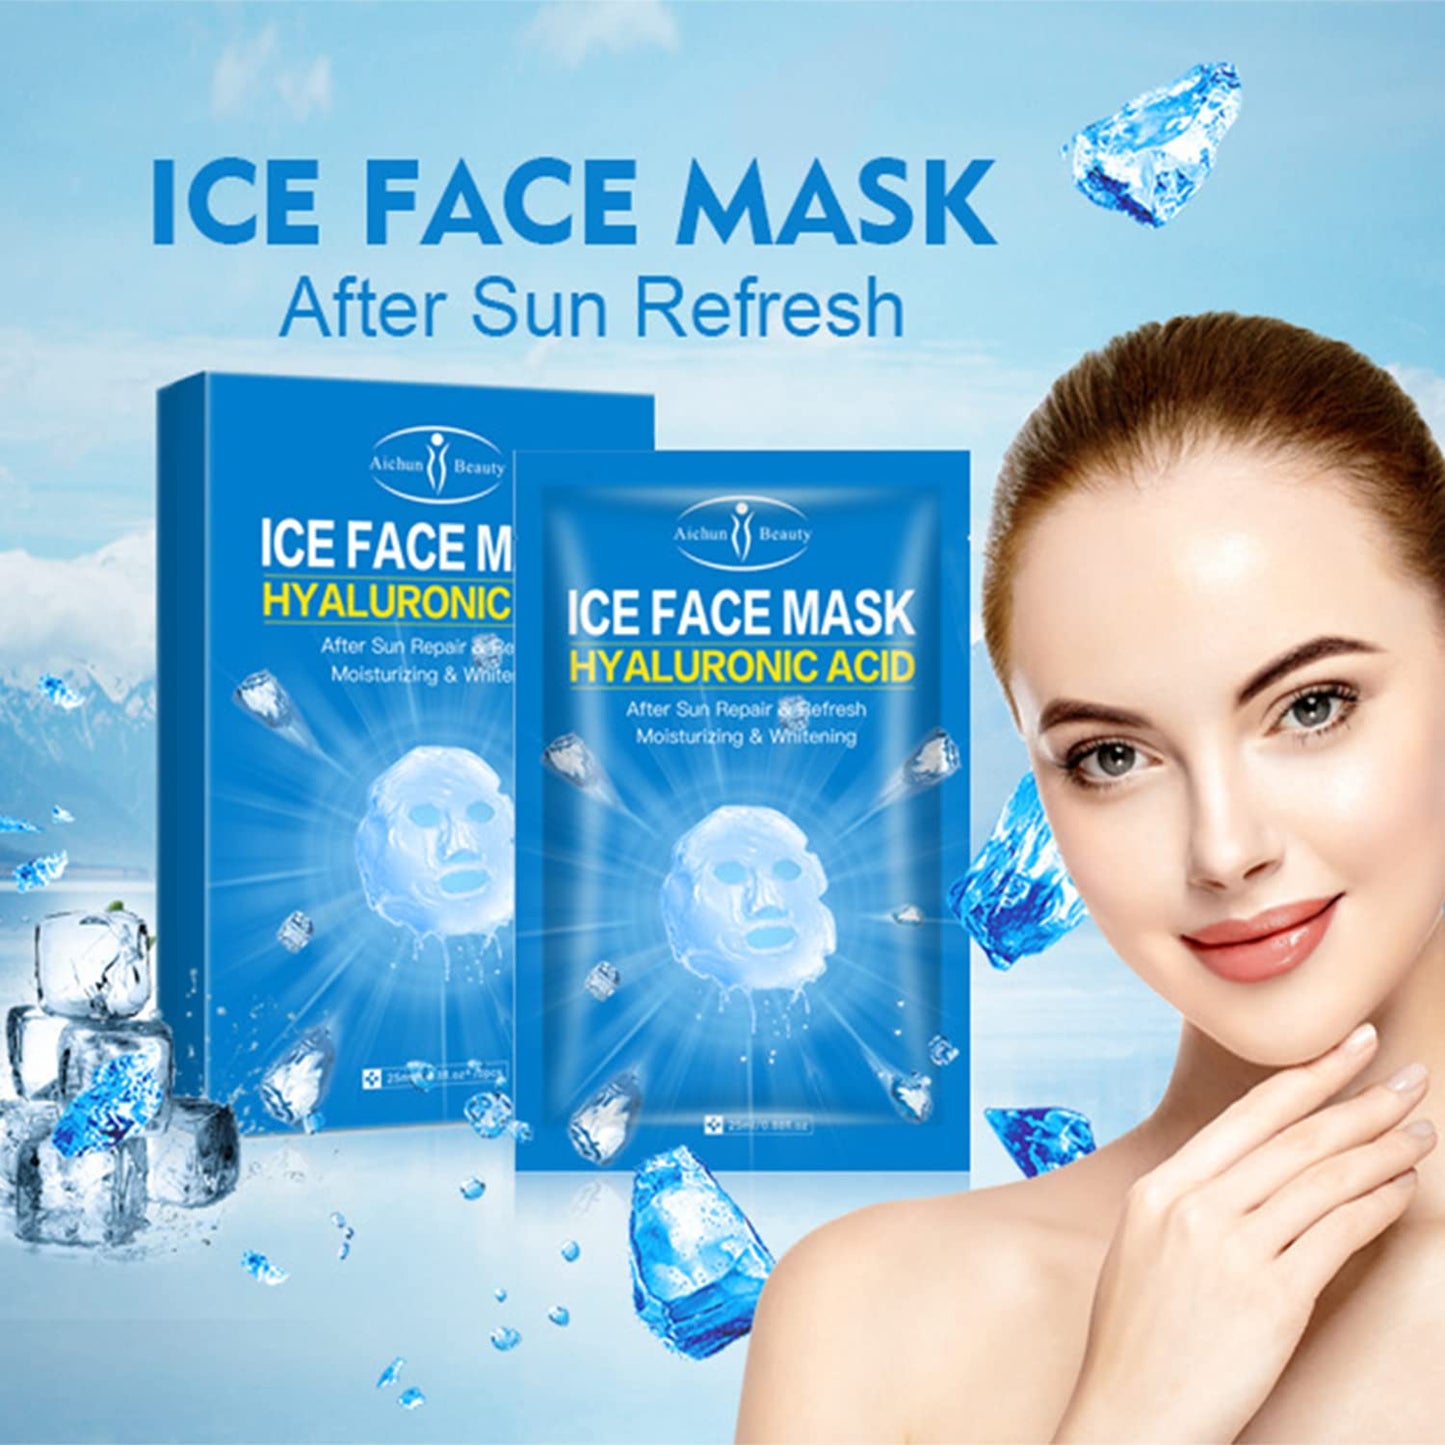 AICHUN BEAUTY Ice Face Mask Hyaluronic Acid After Sun Repair Refresh Moisturizing Relieves Pain Acne Scars Facial Skin Care 25ml / 0.88fl.oz (10 Pack)